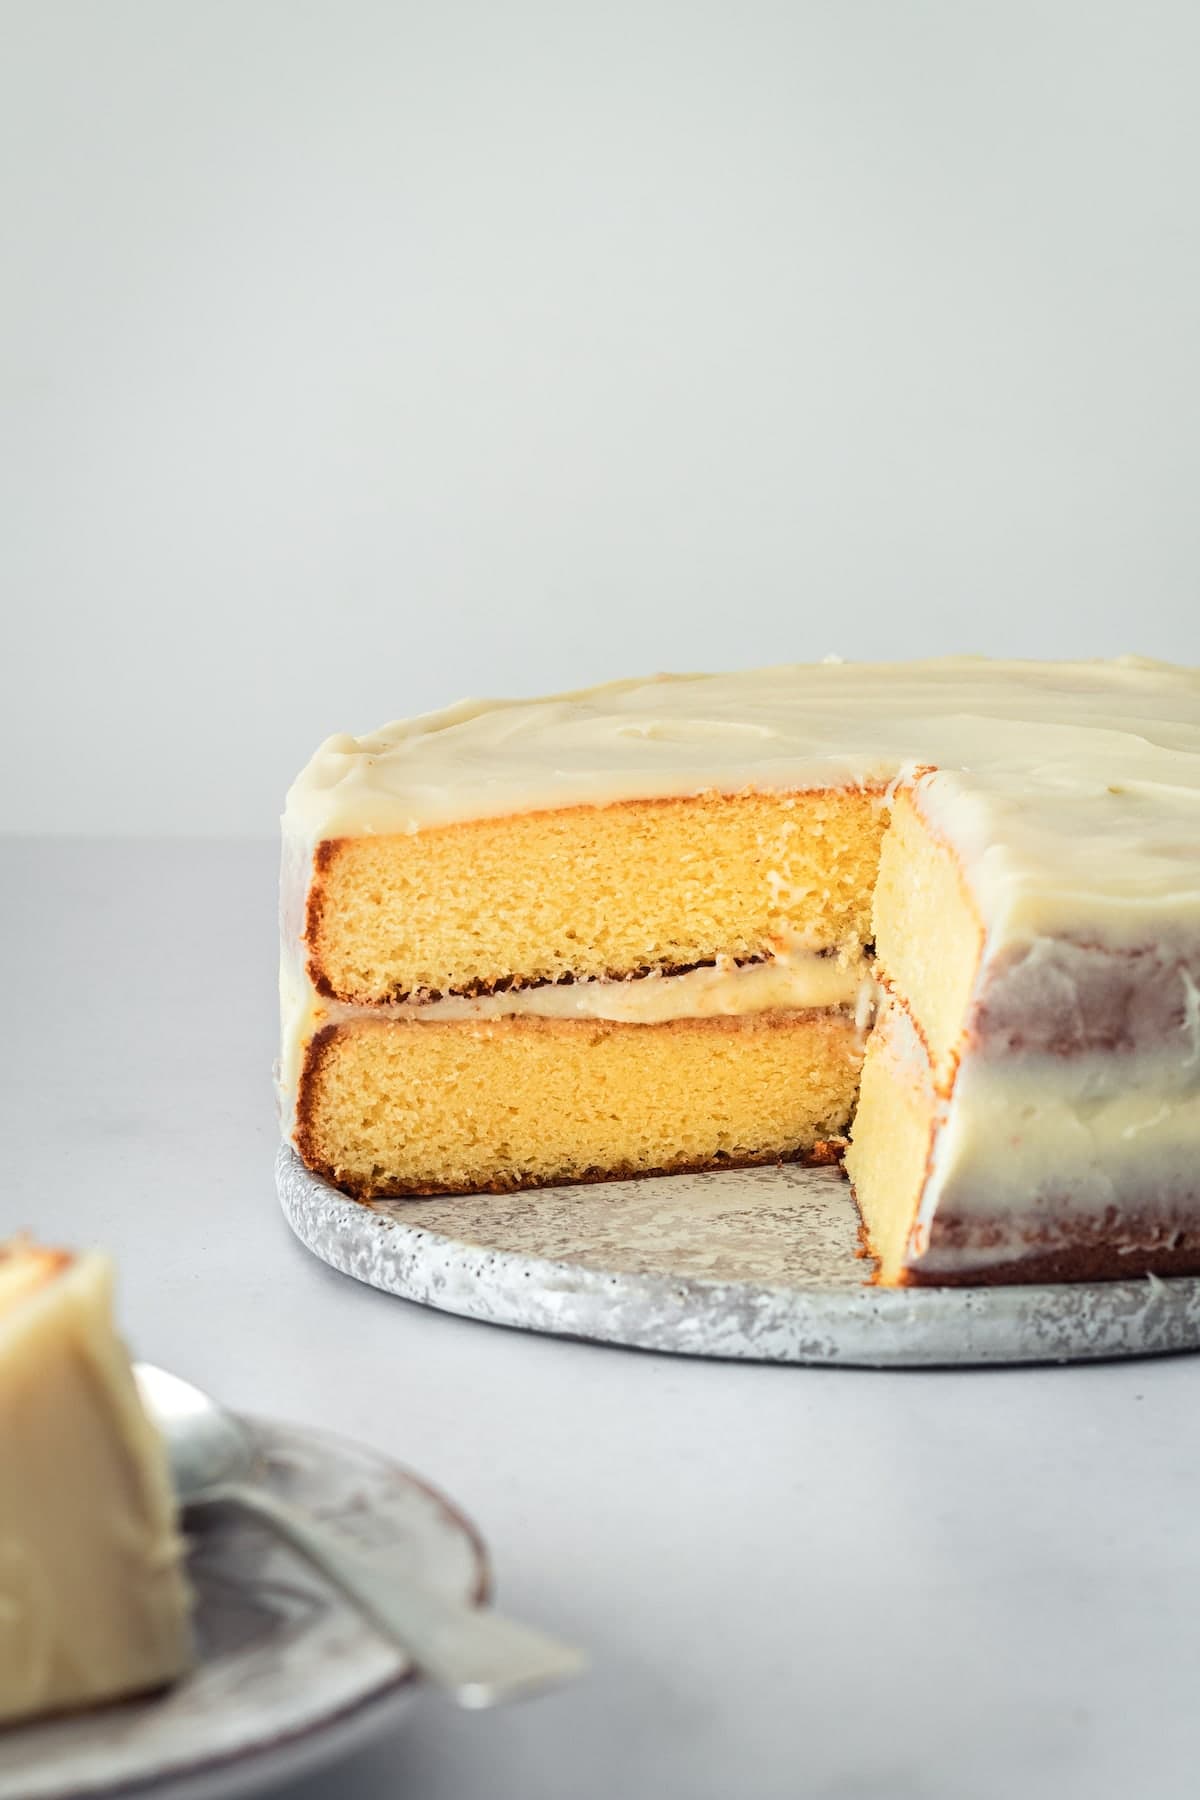 Caramel Cake with Caramel Cream Cheese Frosting with slices removed